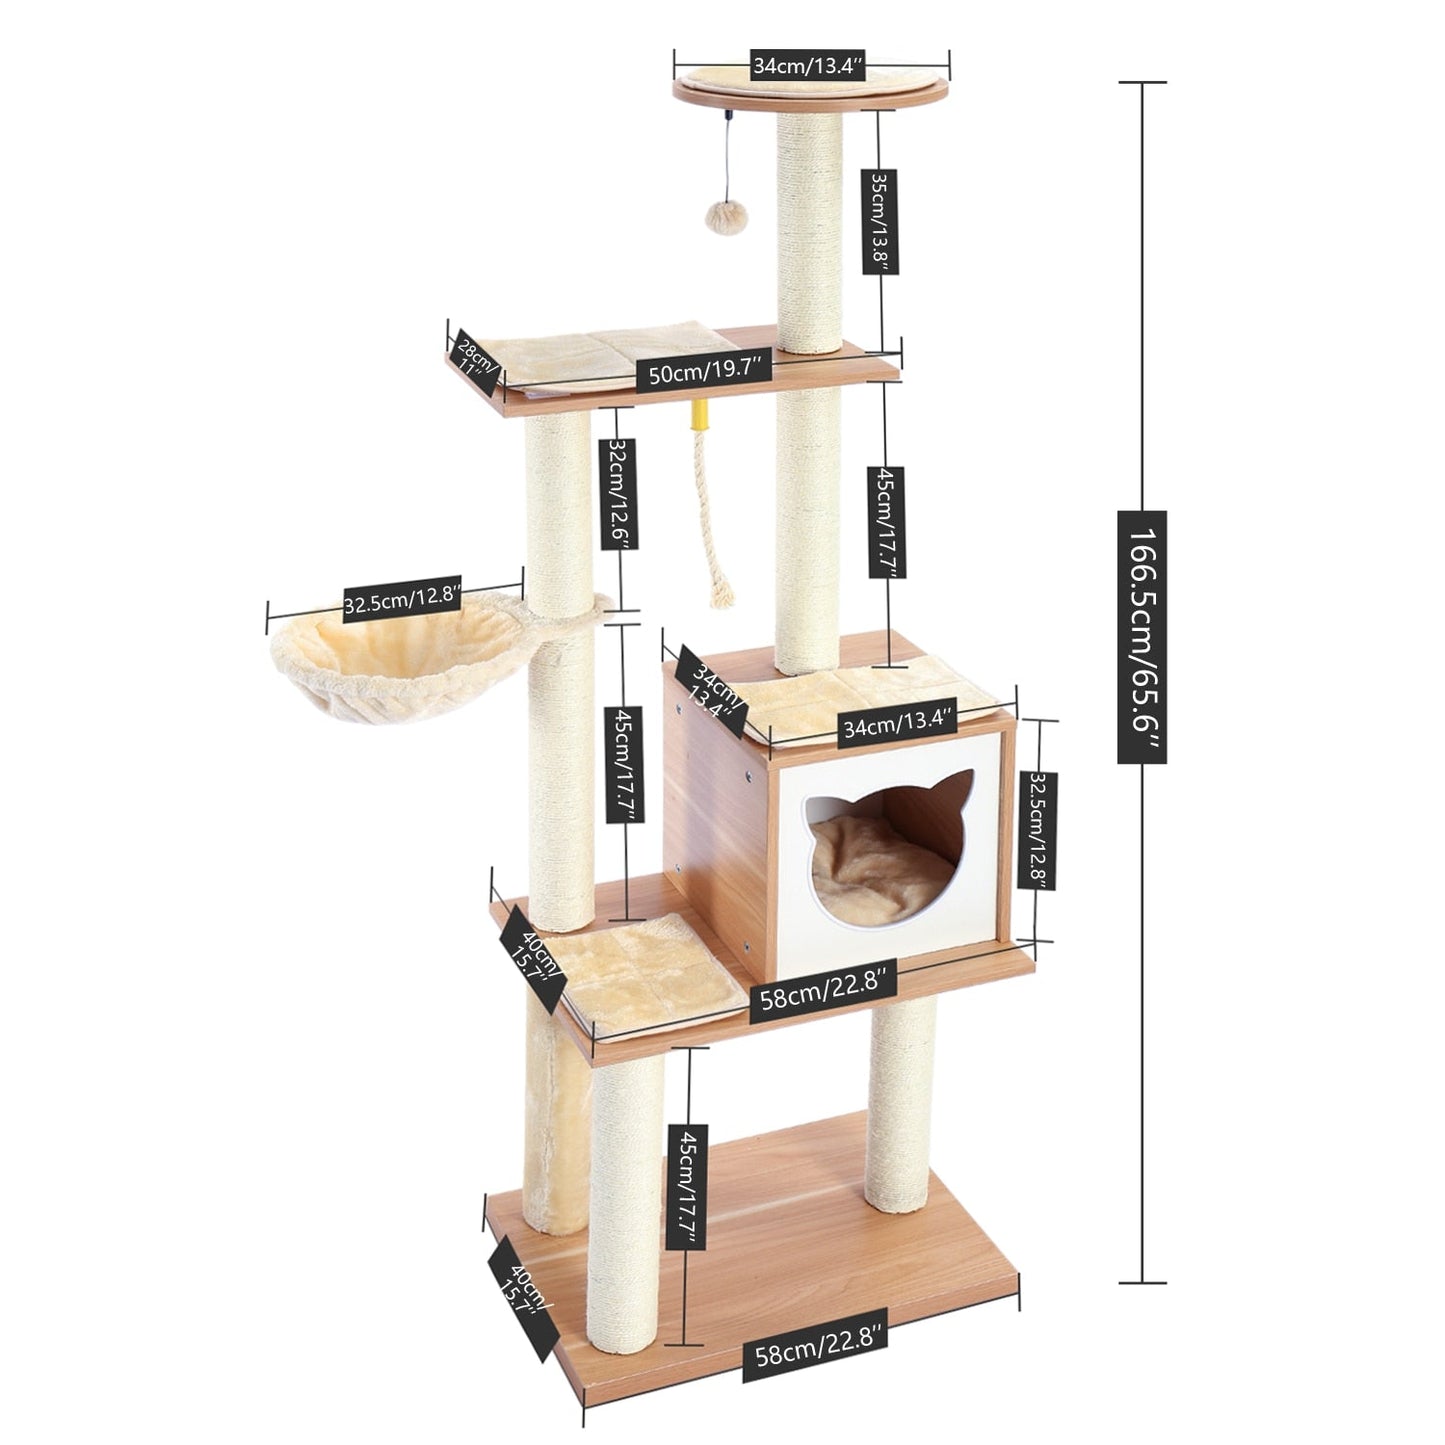 Multi Level Wooden Cat Tree With Hammock & Cat Shape Enclosed Bed